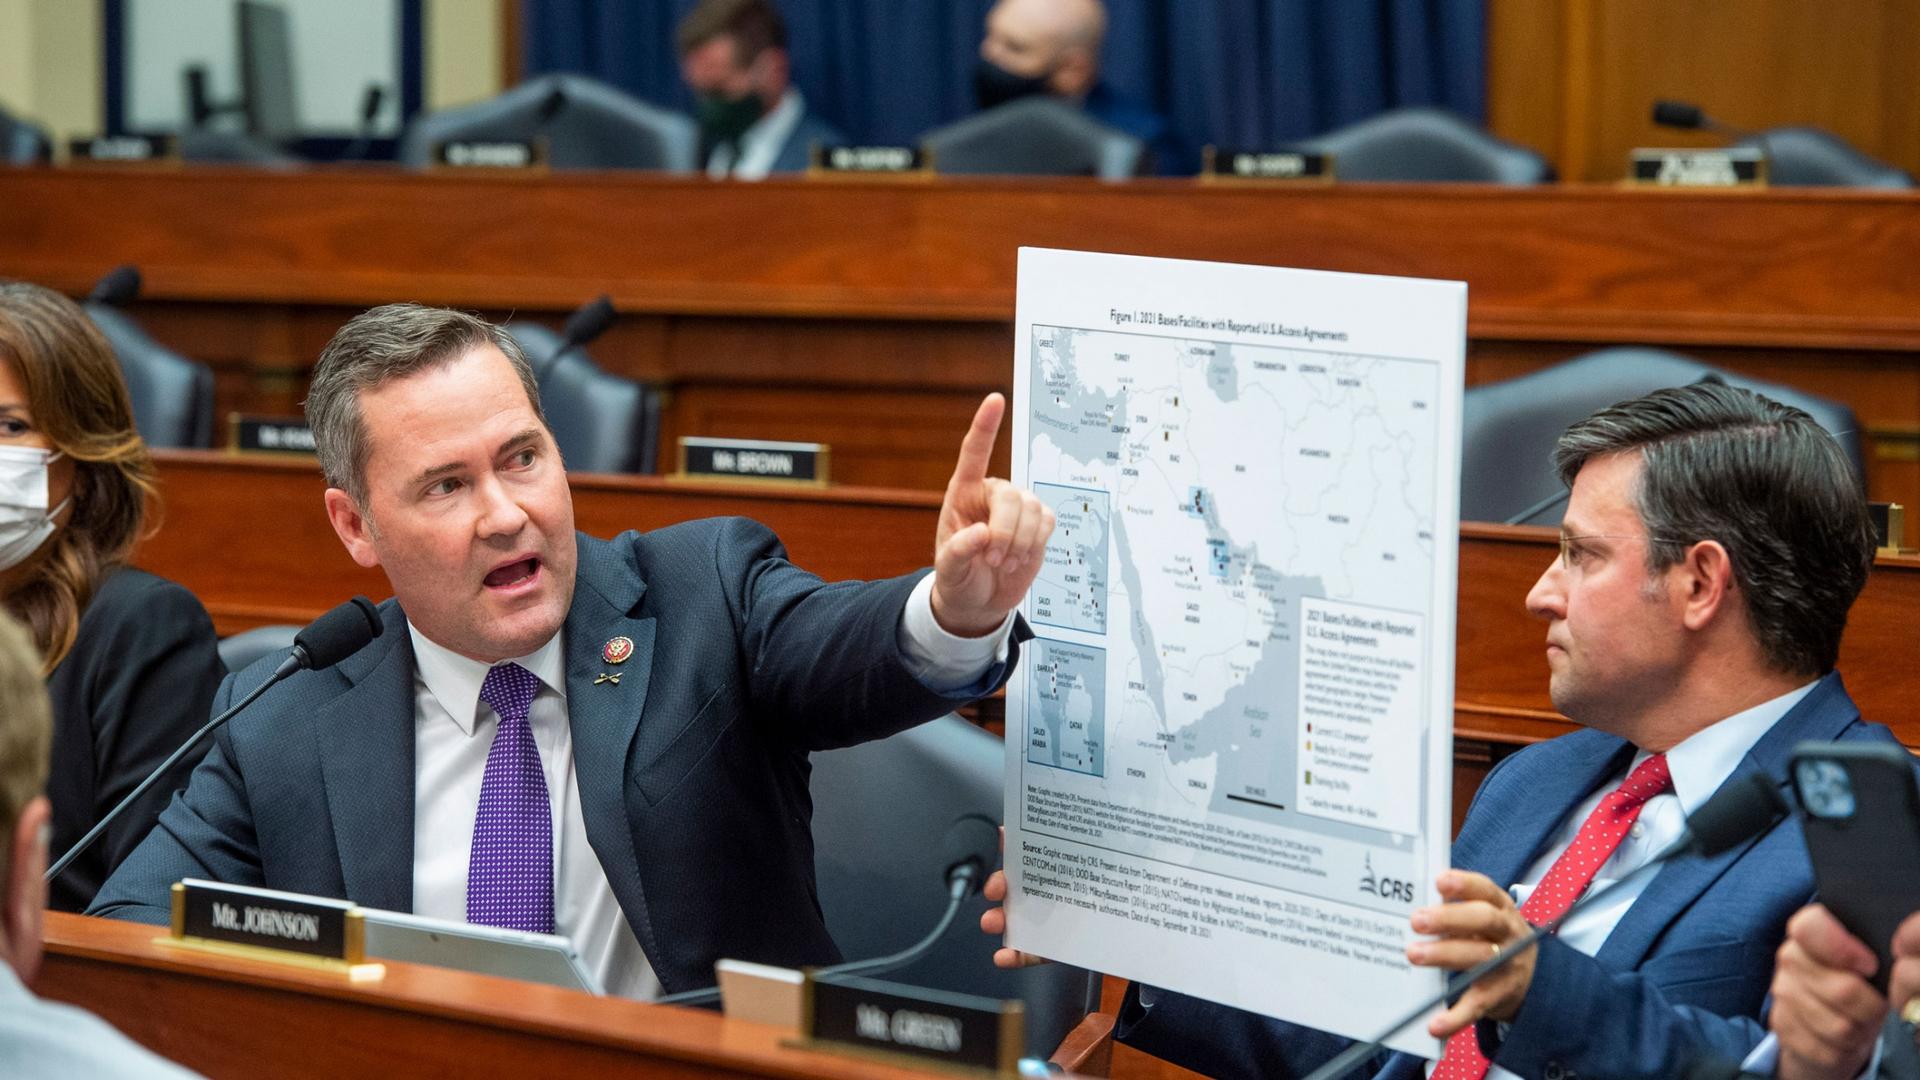 Rep. Michael Waltz speaks as Rep. Mike Johnson displays a map during the House Armed Services Committee on the conclusion of military operations in Afghanistan and plans for future counterterrorism operations on Wednesday, Sept. 29, 2021,